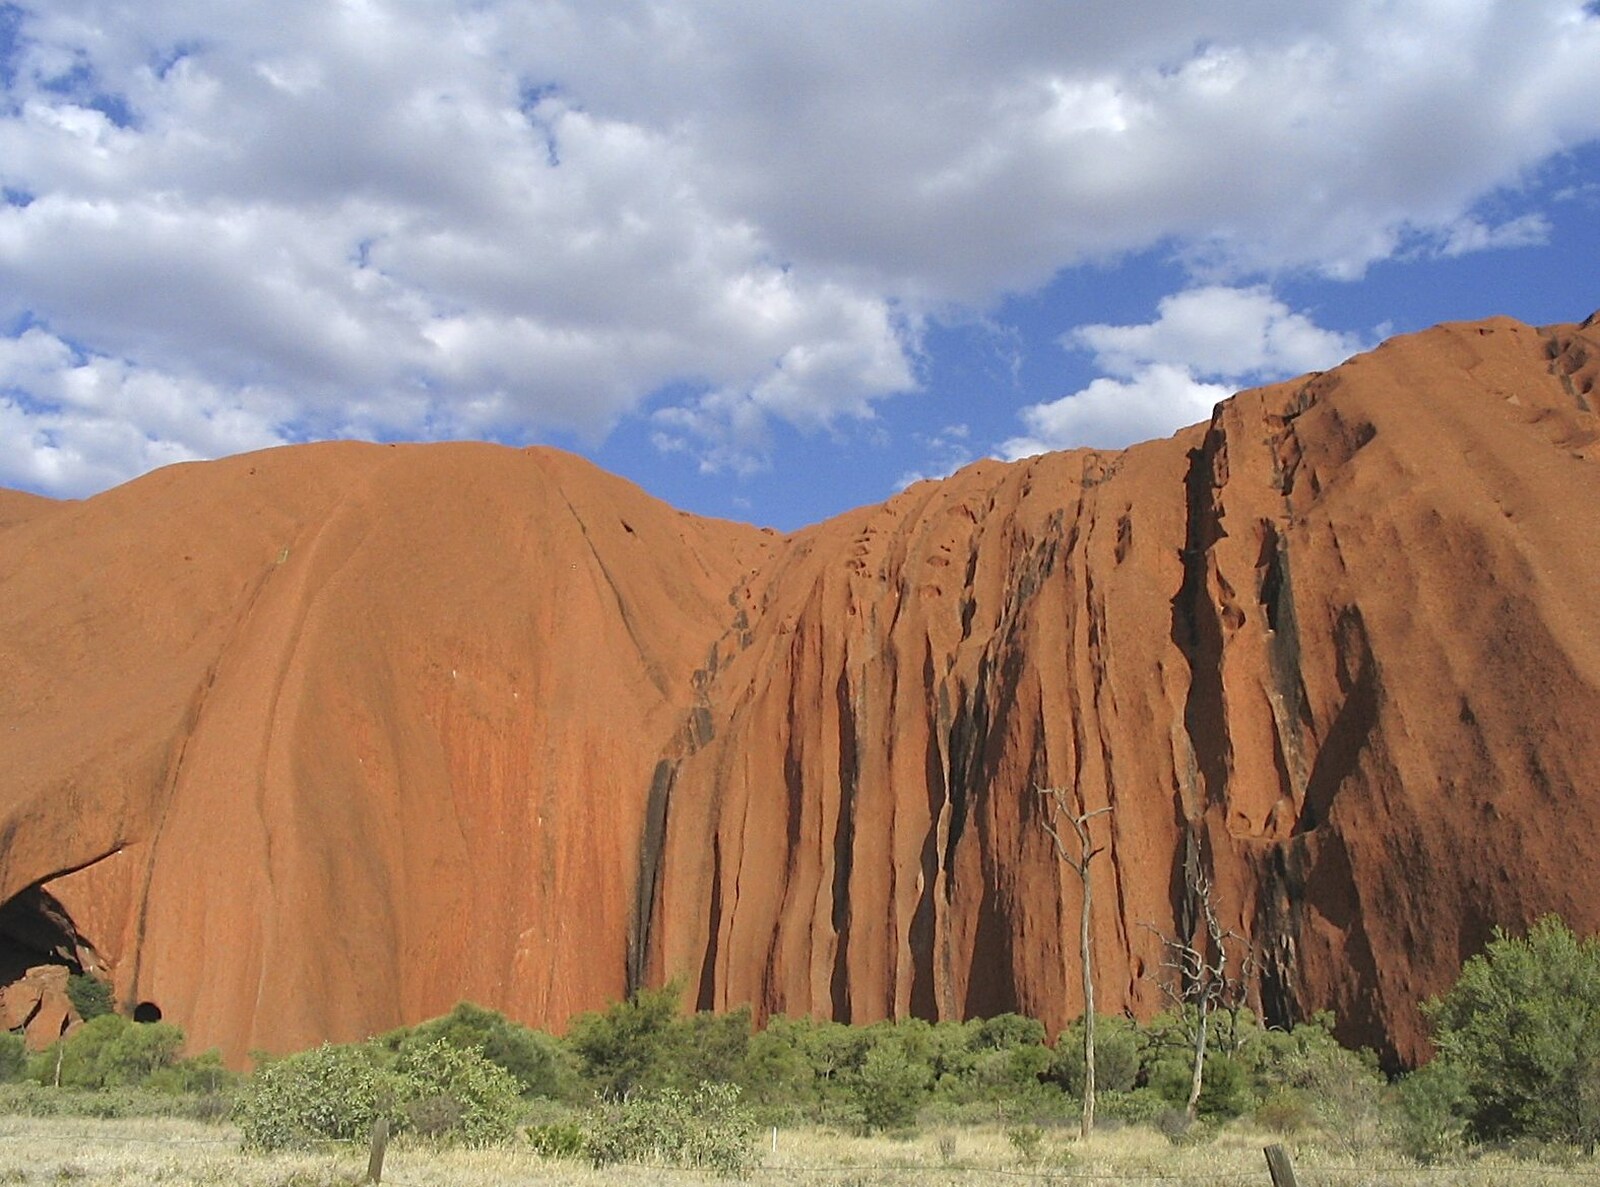 Vertically-stacked sandstone from The Red Centre: Yulara and Uluru, Northern Territories, Australia - 8th October 2004